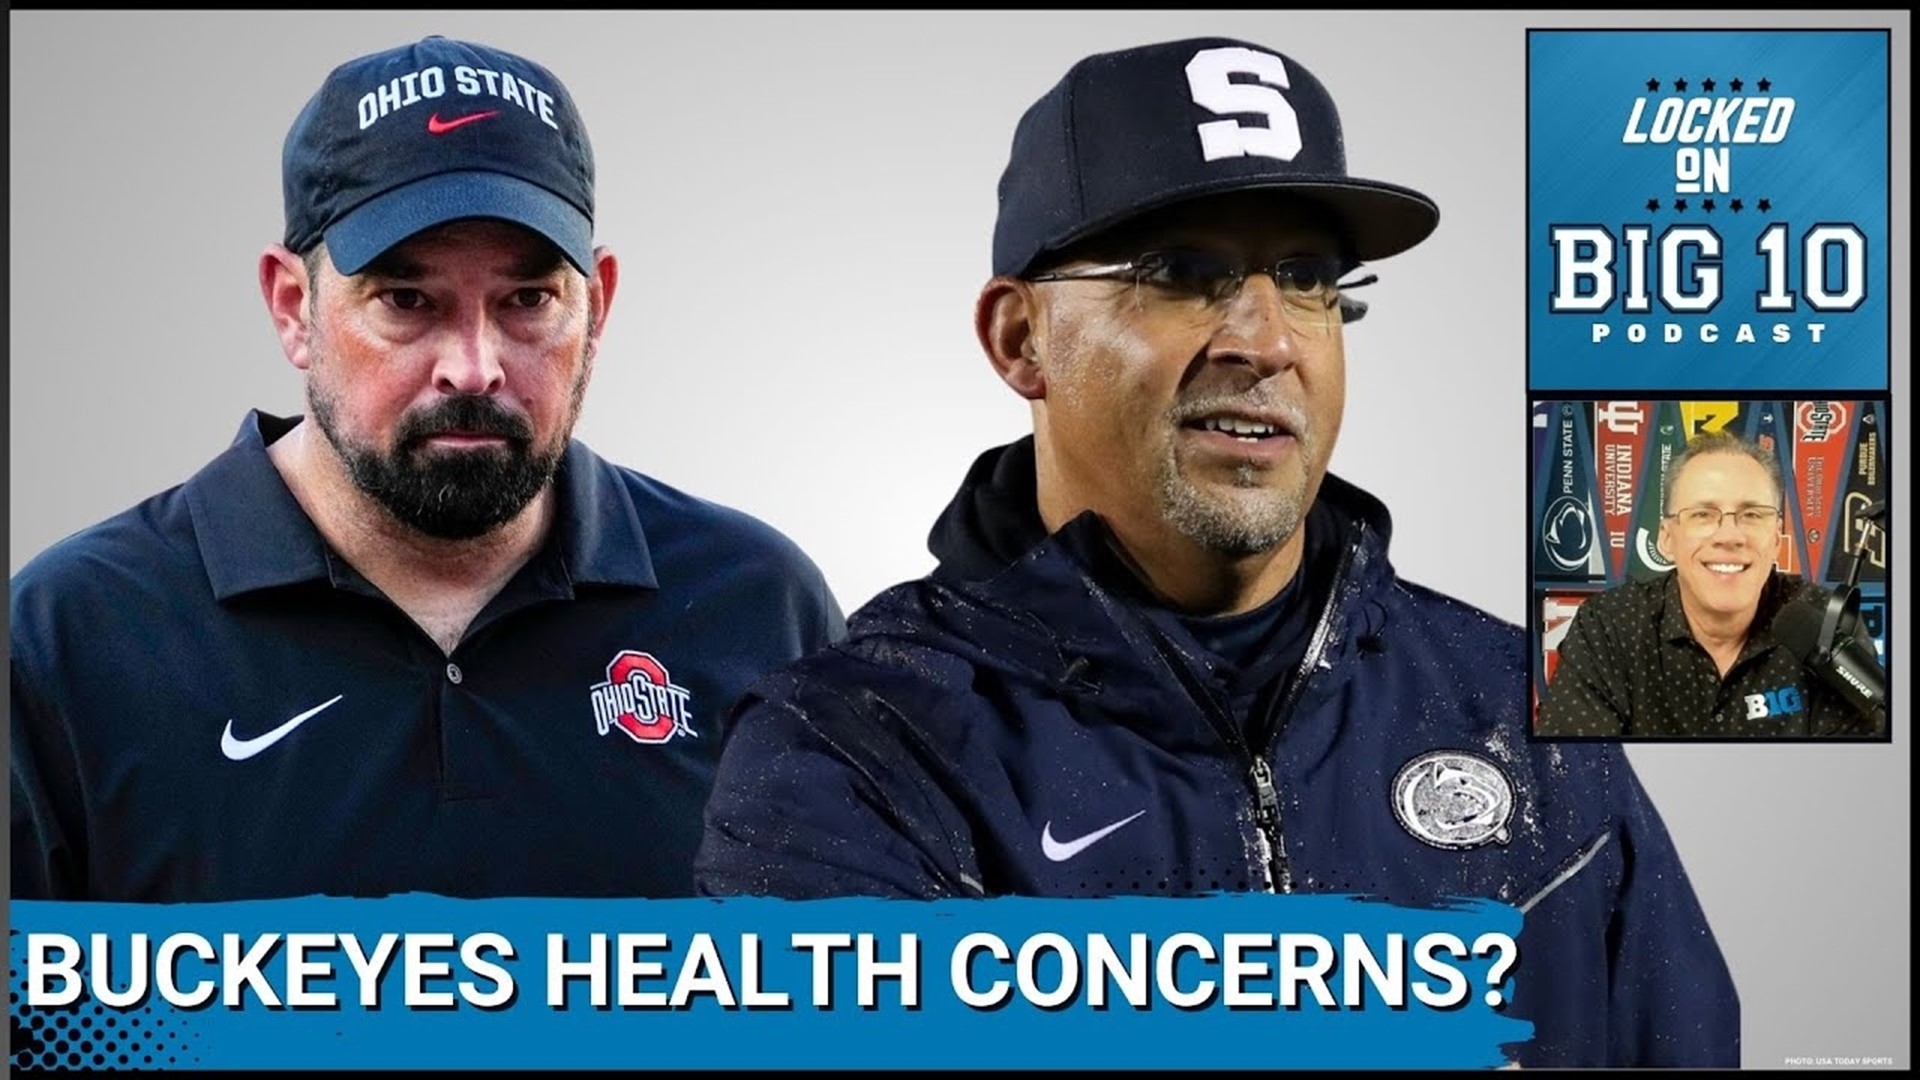 The Ohio State Buckeyes are banged up.  Is Ryan Day's team healthy enough for their monster showdown vs James Franklin and his pesky Penn State Nittany Lions?